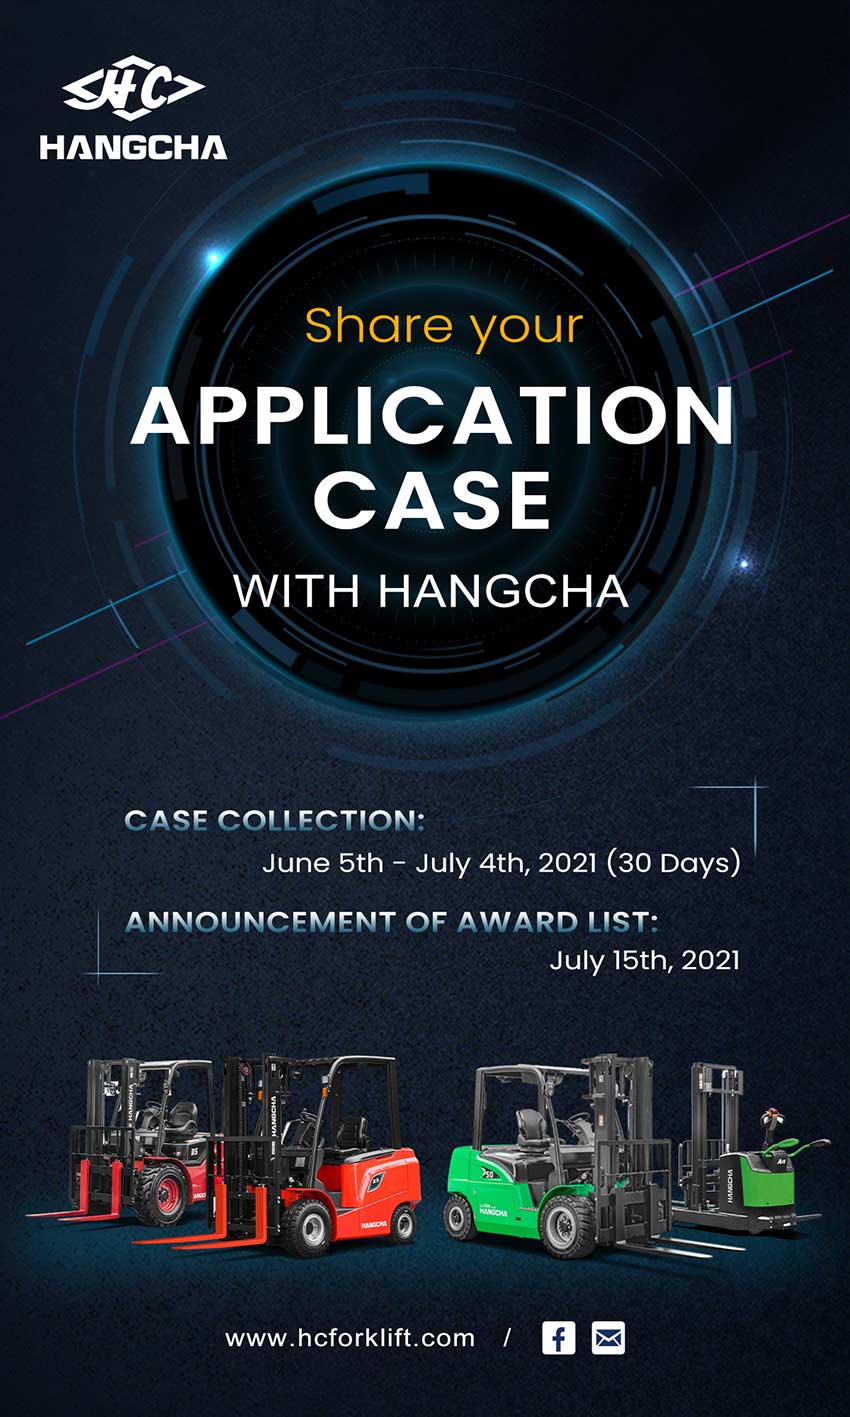 Share-your-application-case-with-#Hangcha-(2)